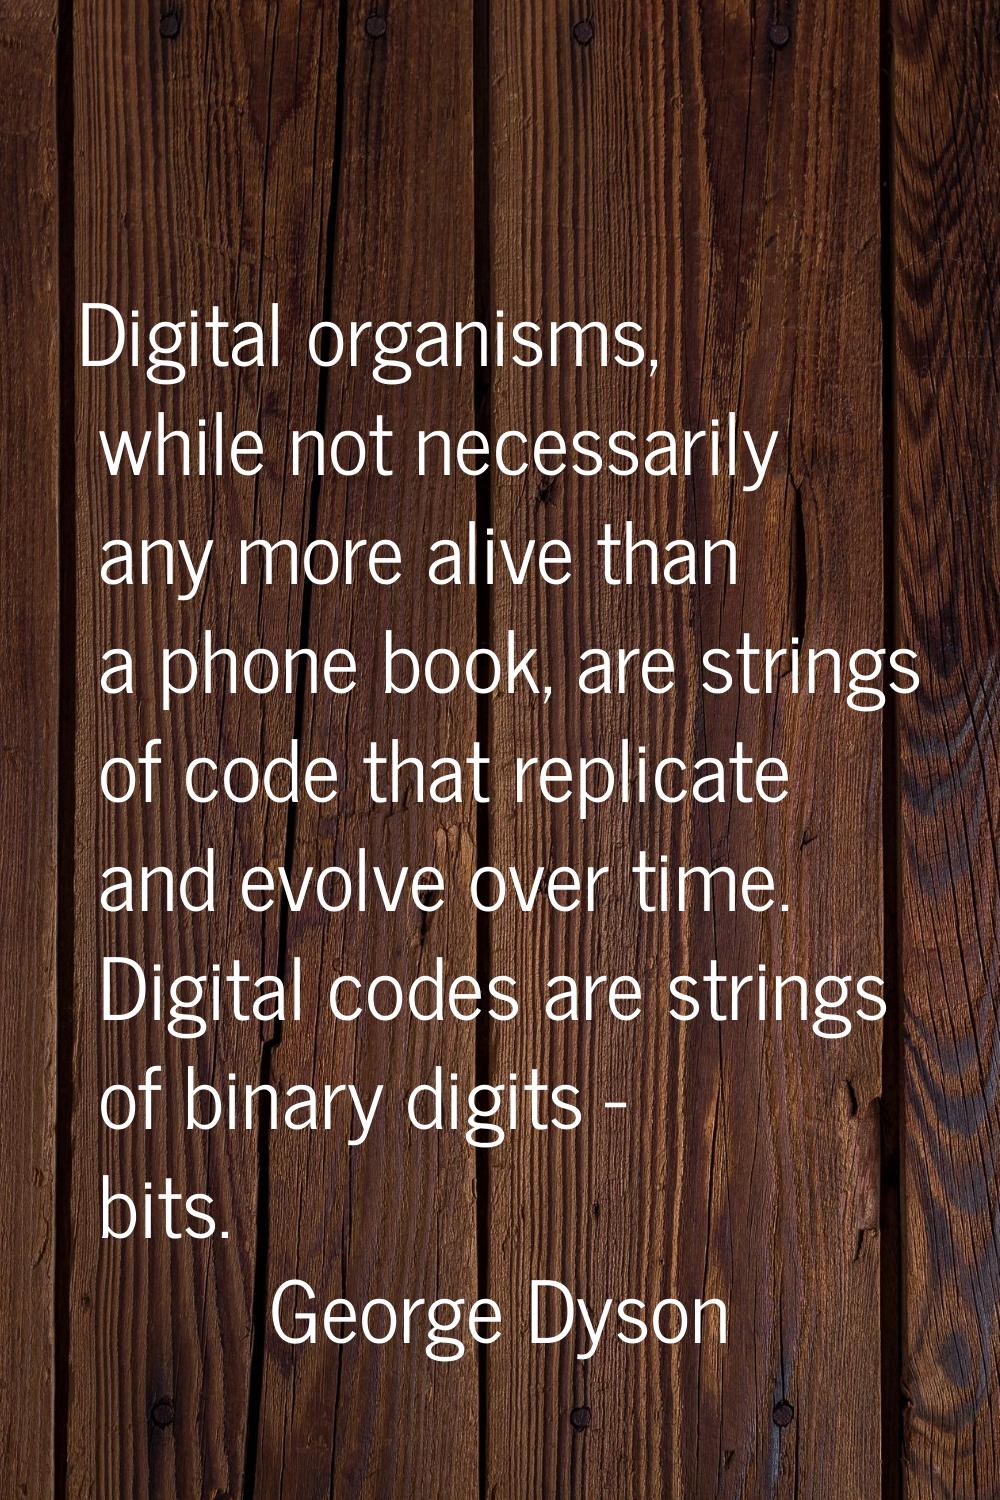 Digital organisms, while not necessarily any more alive than a phone book, are strings of code that